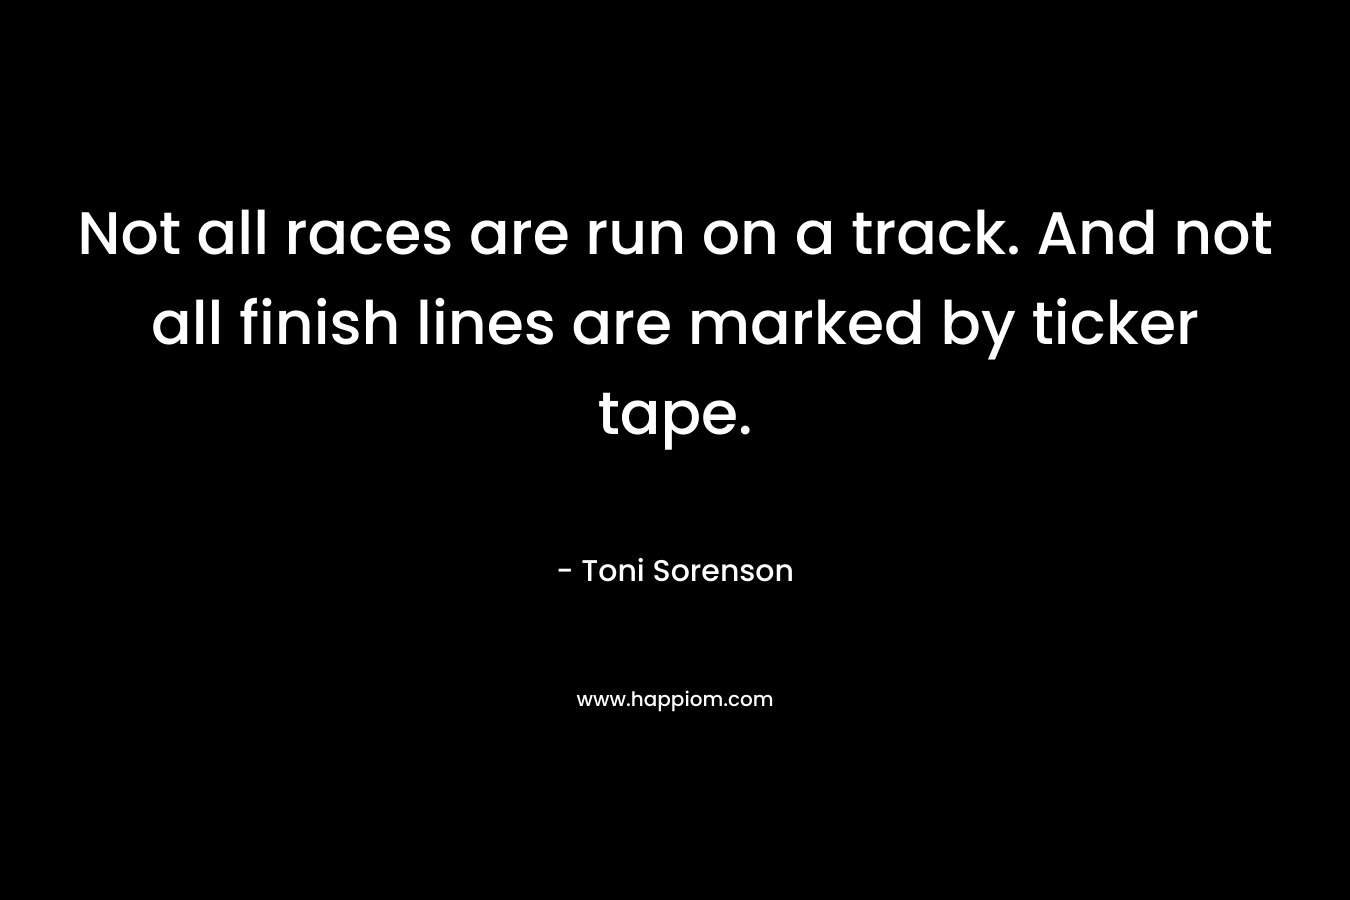 Not all races are run on a track. And not all finish lines are marked by ticker tape.